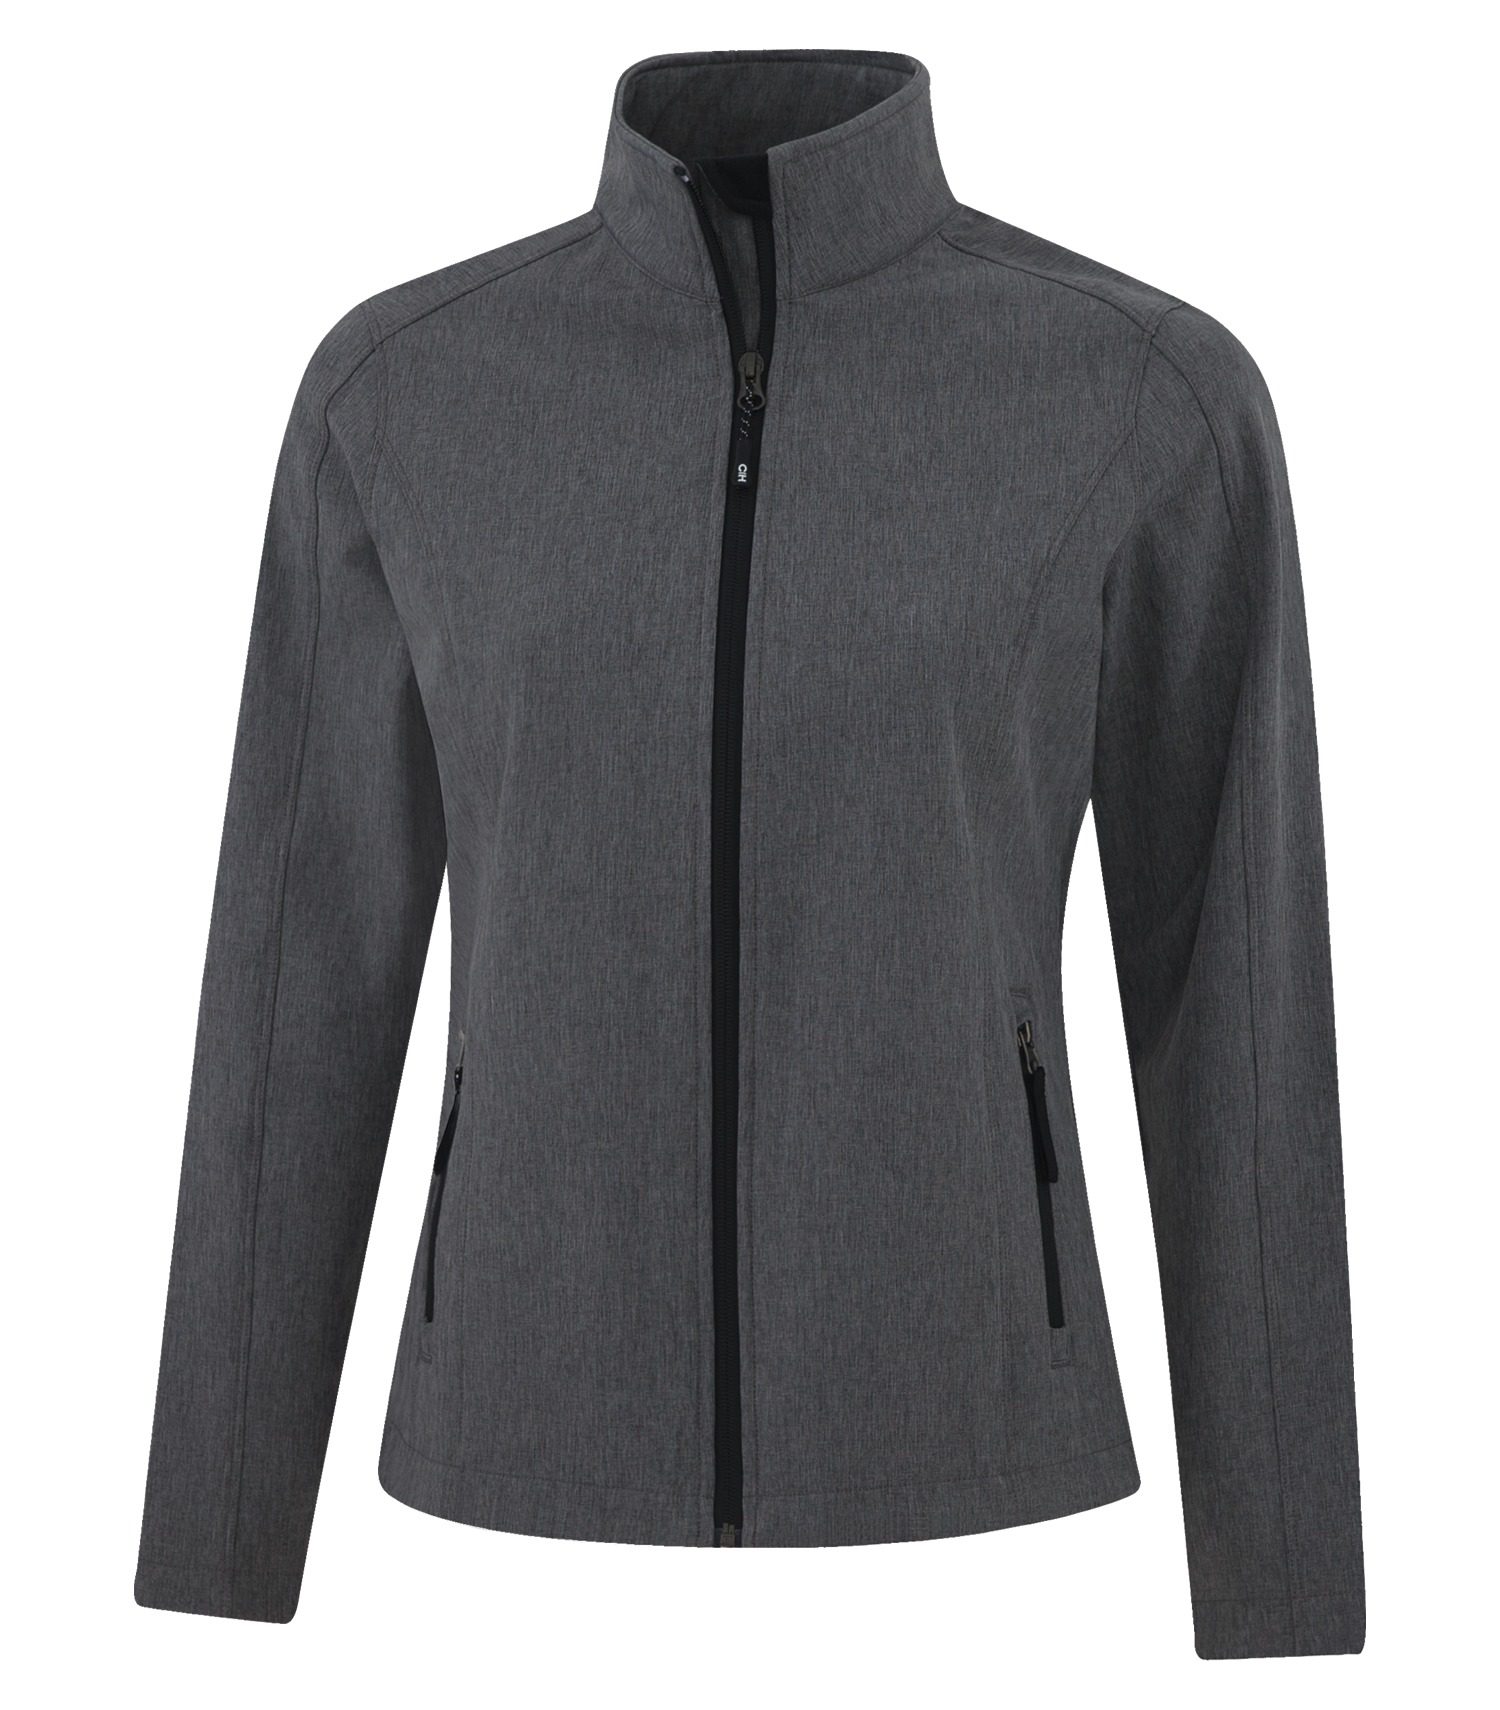 COAL HARBOUR EVERYDAY WATER REPELLENT SOFT SHELL LADIES' JACKET #L7603 Pearl Grey Heather